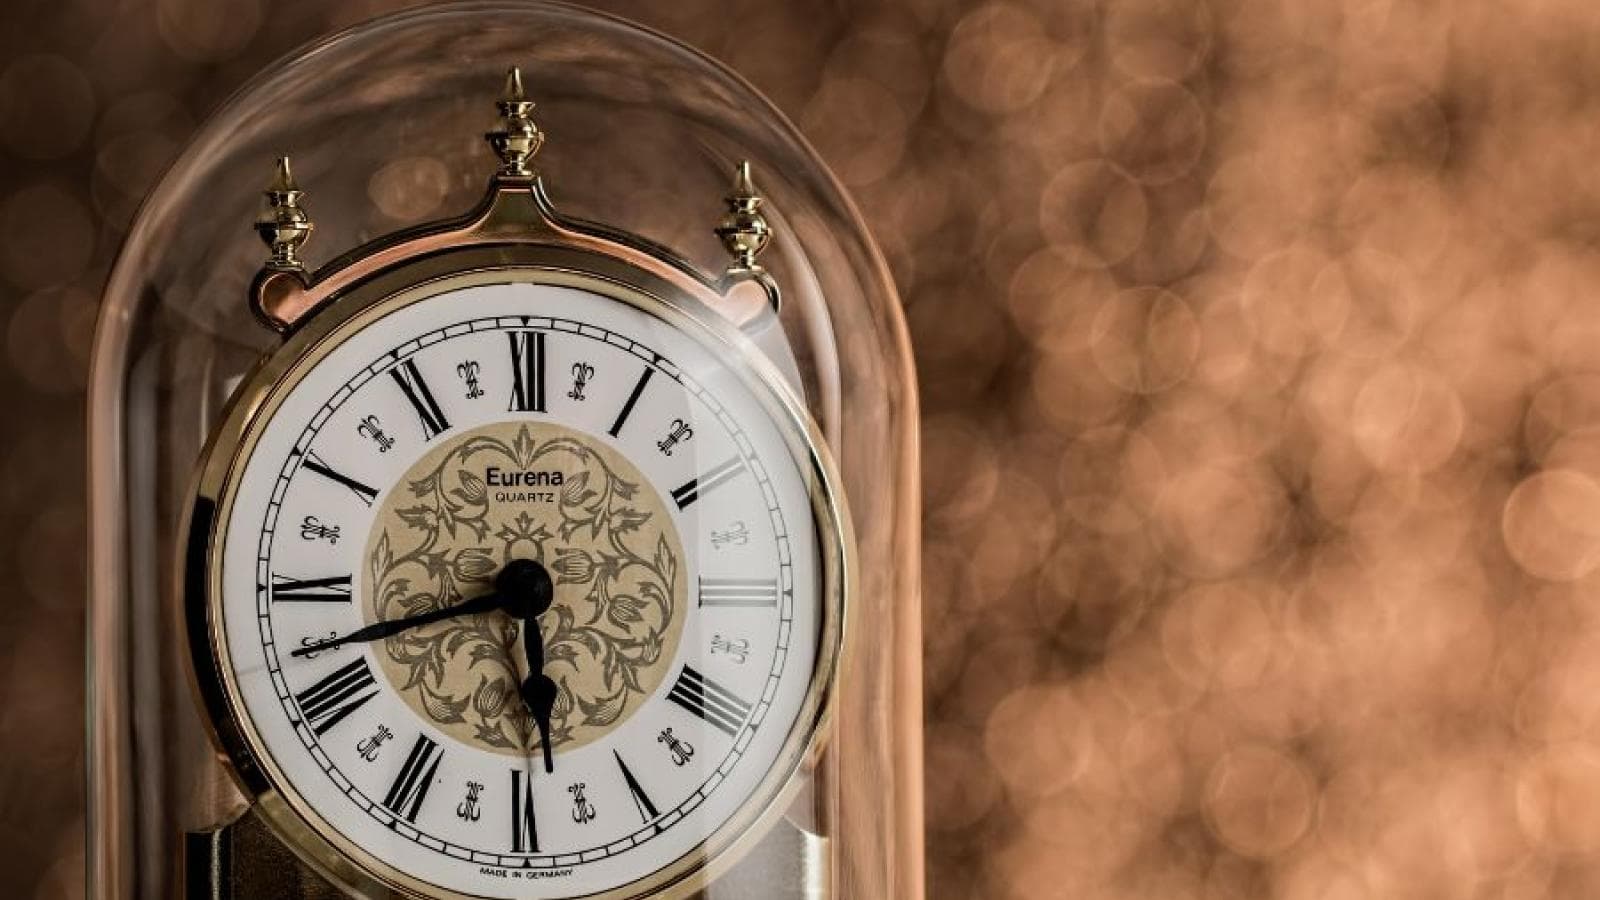 Image focuses in on a traditional clock in a glass cloche